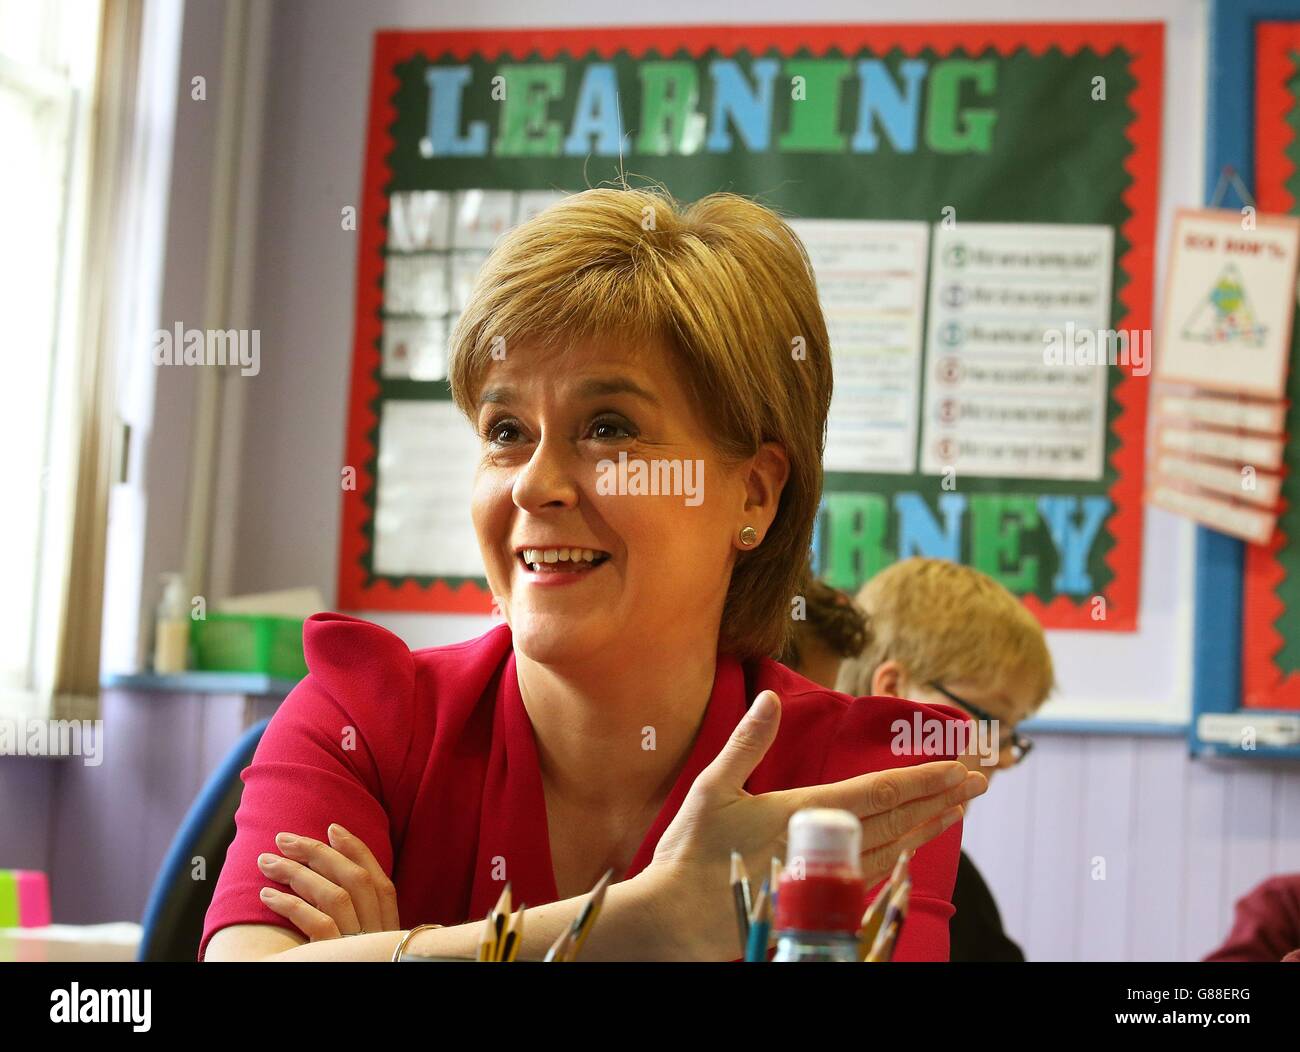 First Minister Nicola Sturgeon visits Craigentinny Primary School in Edinburgh to meet pupils taking part in active maths and active literacy lessons, as she prepares to set out how she plans to use new powers that are coming to Holyrood both 'creatively and ambitiously'. Stock Photo